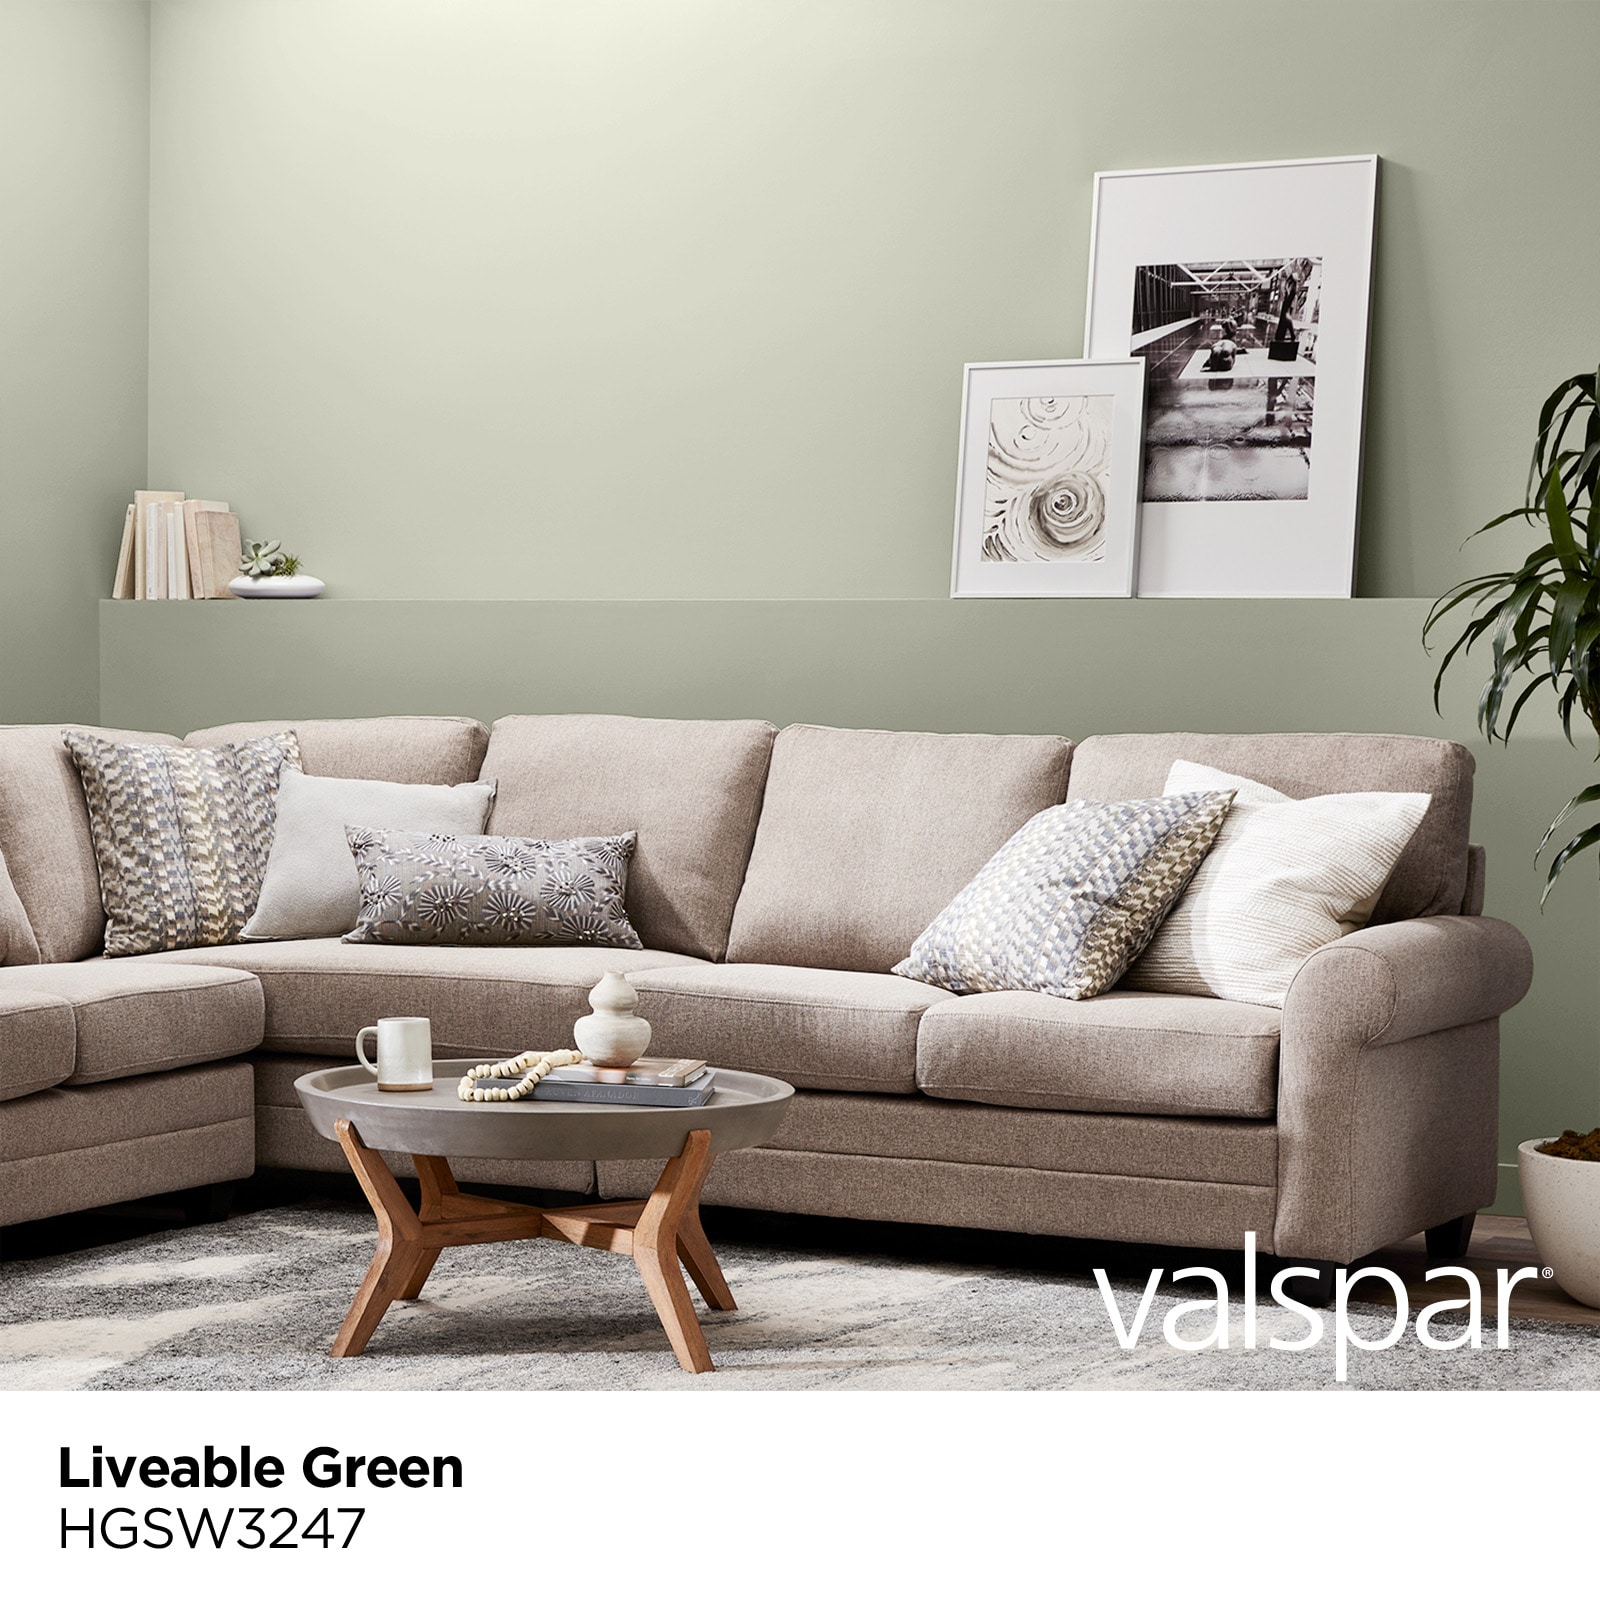 Valspar 95-33A Everglade Green Precisely Matched For Paint and Spray Paint